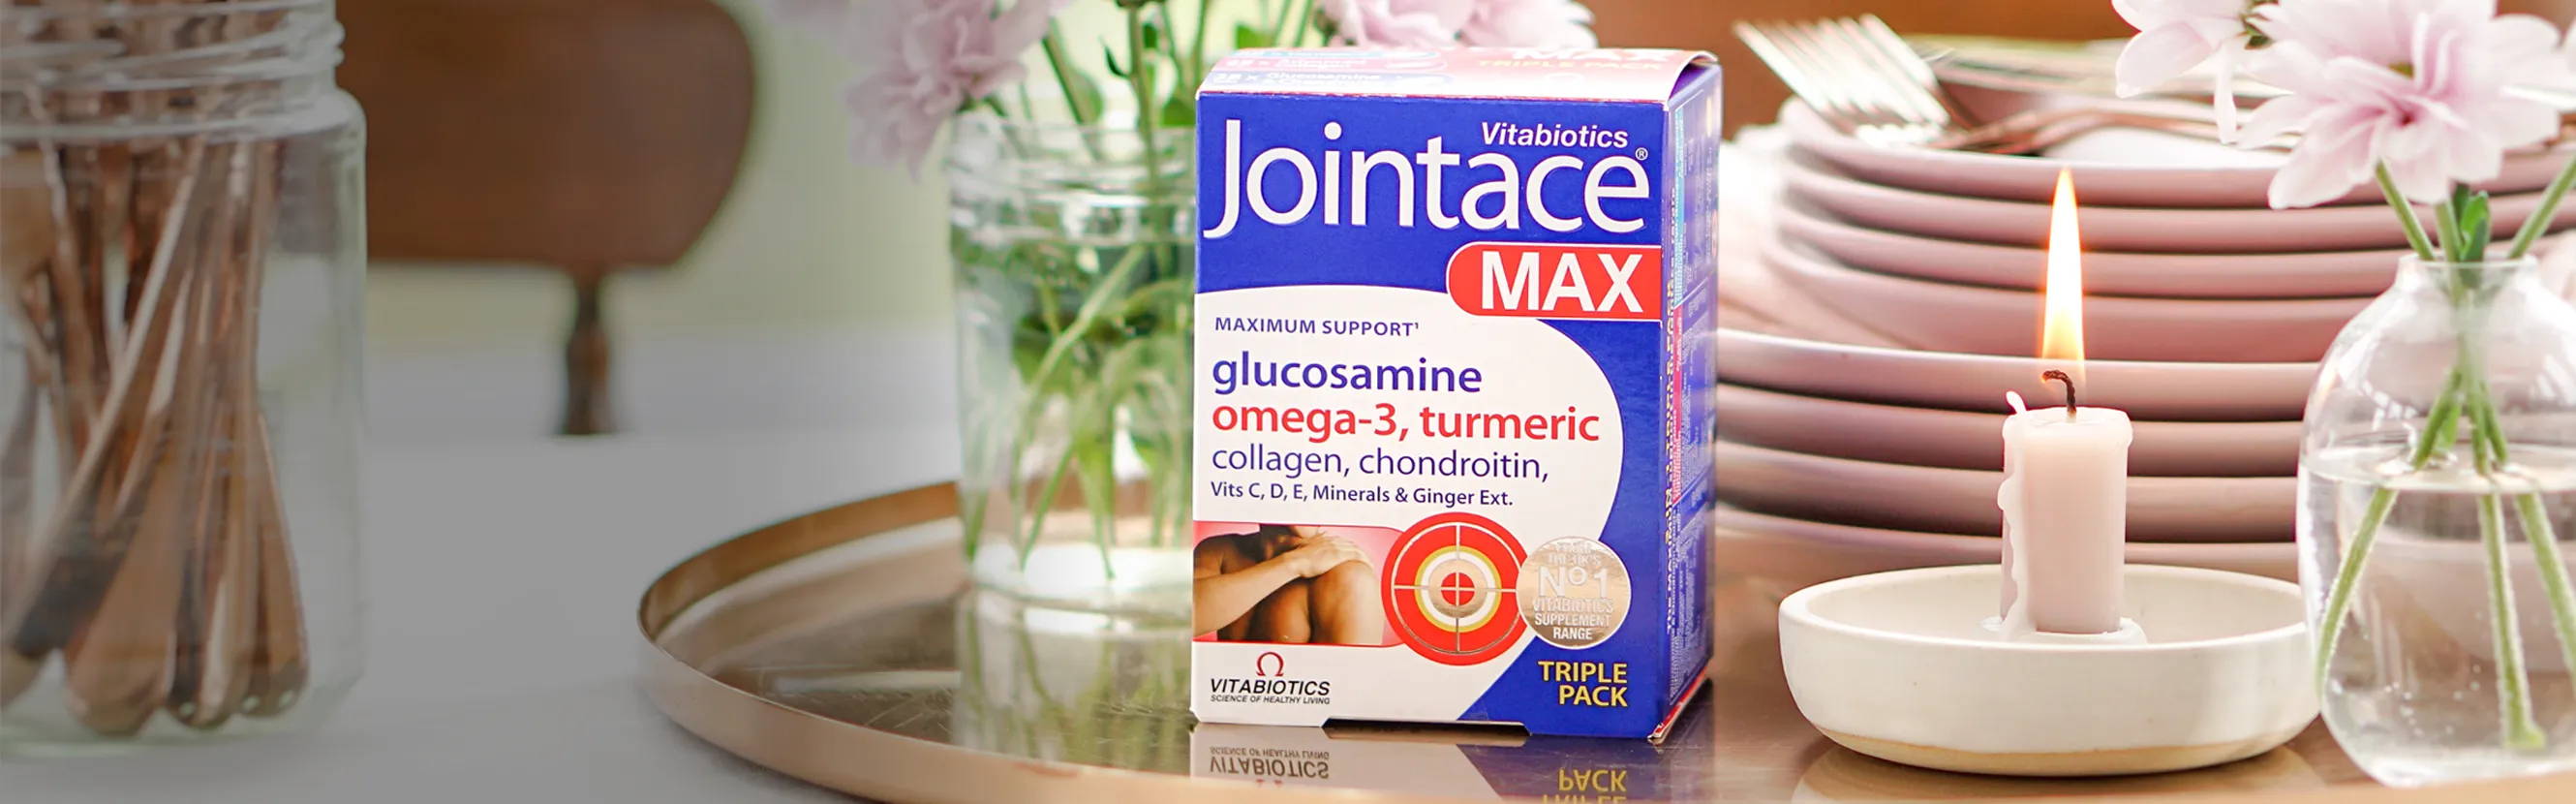  When you’re living your life to its fullest, choose the most comprehensive level of support in the entire Jointace range. Jointace Max gives you all the benefits of Jointace with the added advantage of collagen, Turmeric and super-strength Omega-3. 